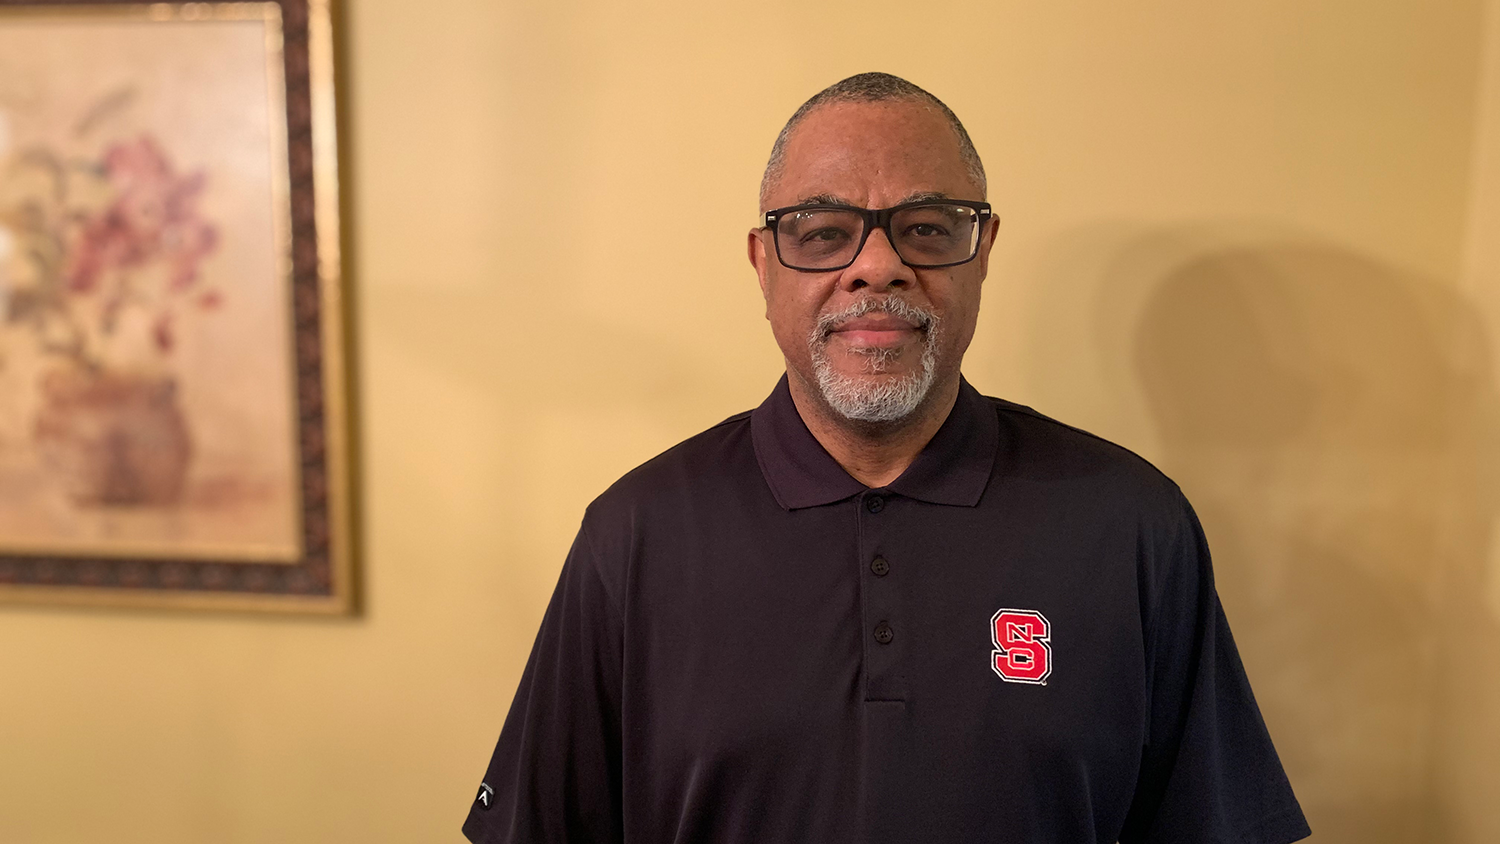 John Grimes - Celebrating Black Excellence: John Grimes is Providing Workforce Solutions - College of Natural Resources News - NC State University